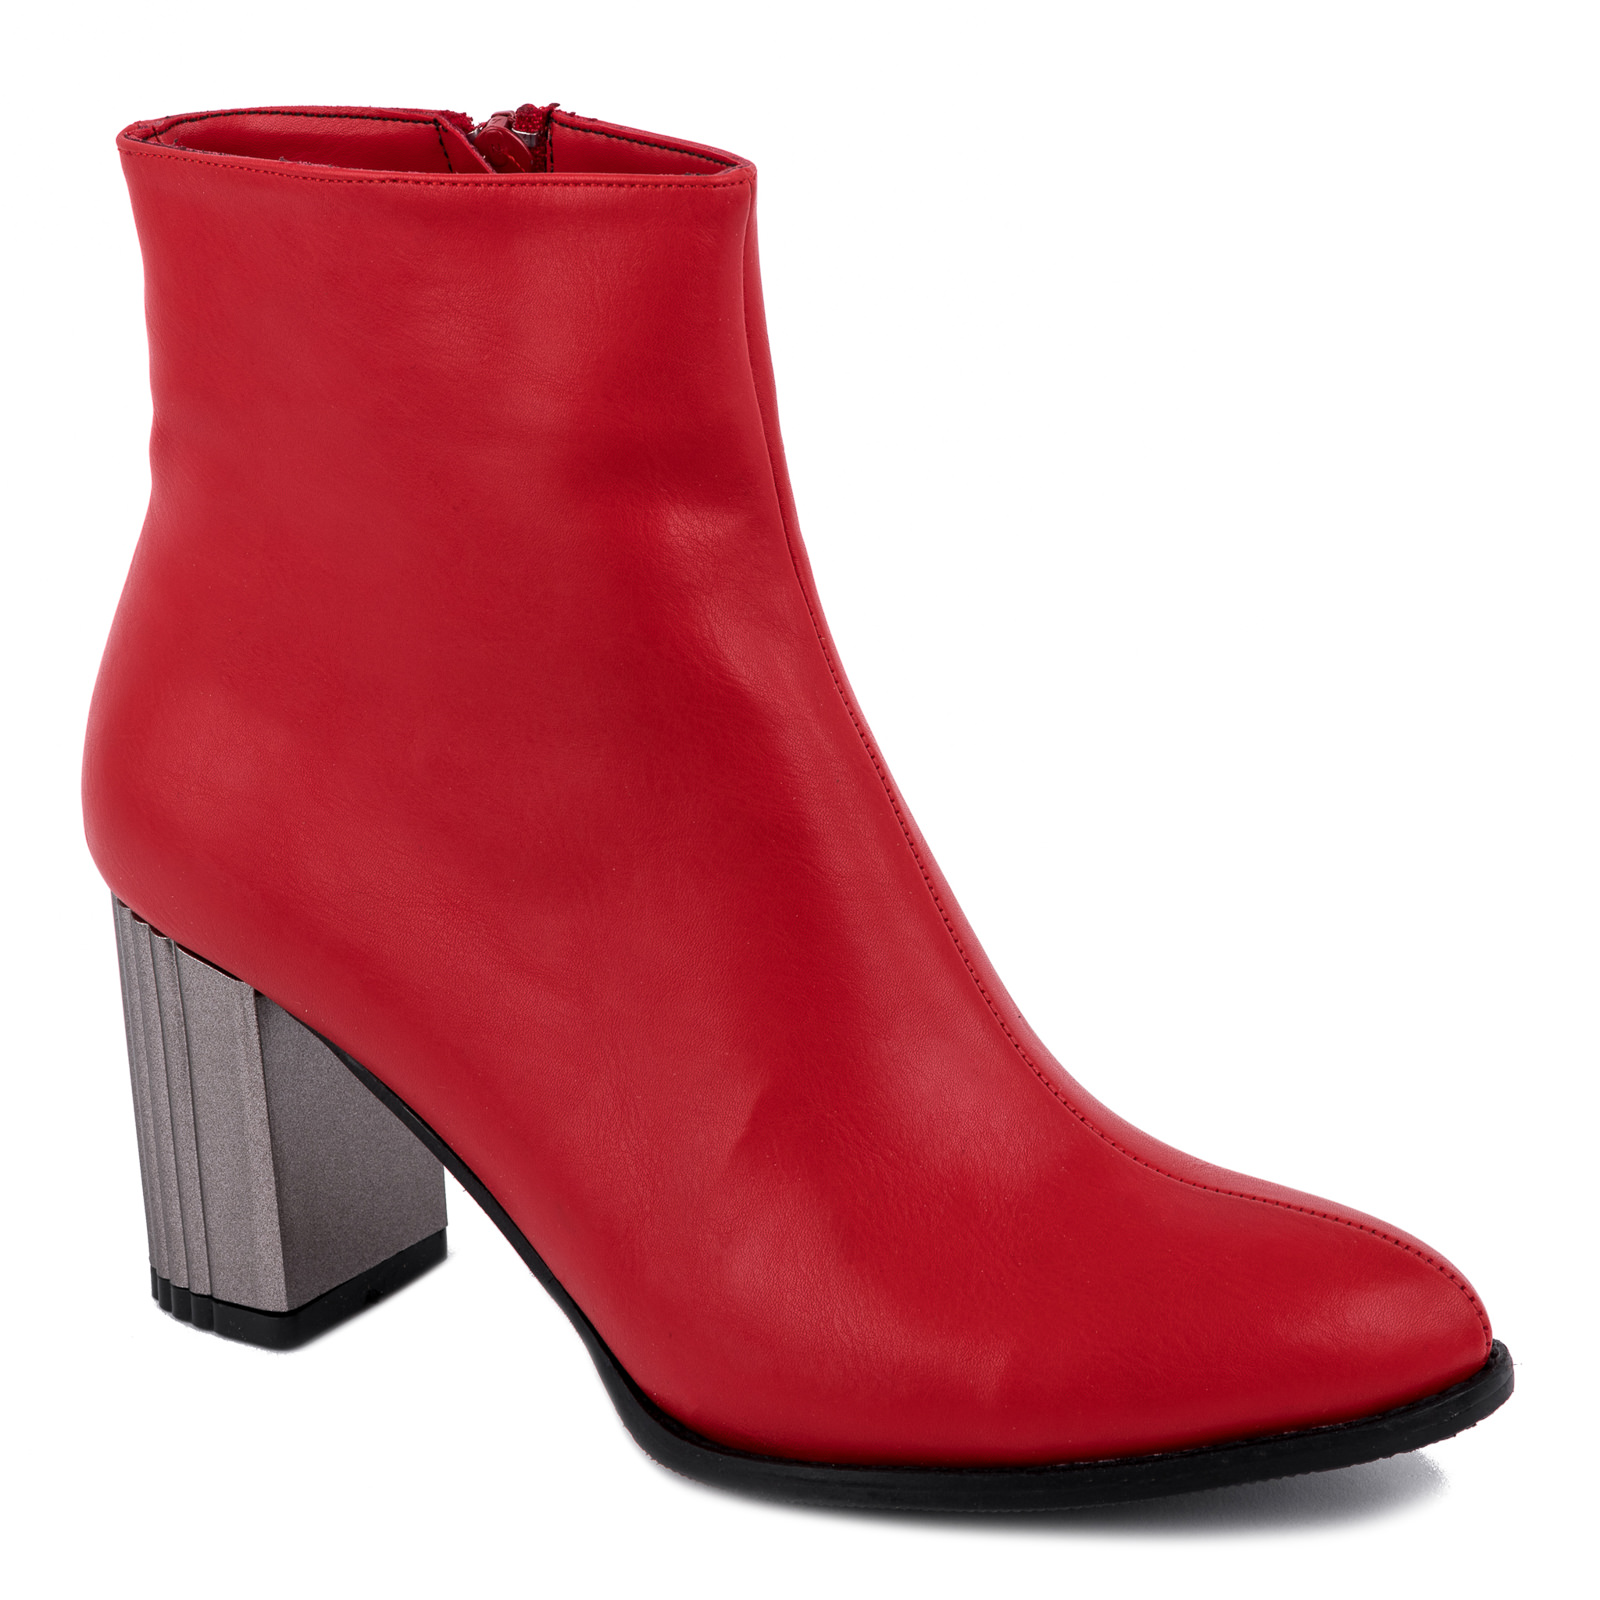 ANKLE BOOTS WITH SILVER BLOCK HEEL - RED